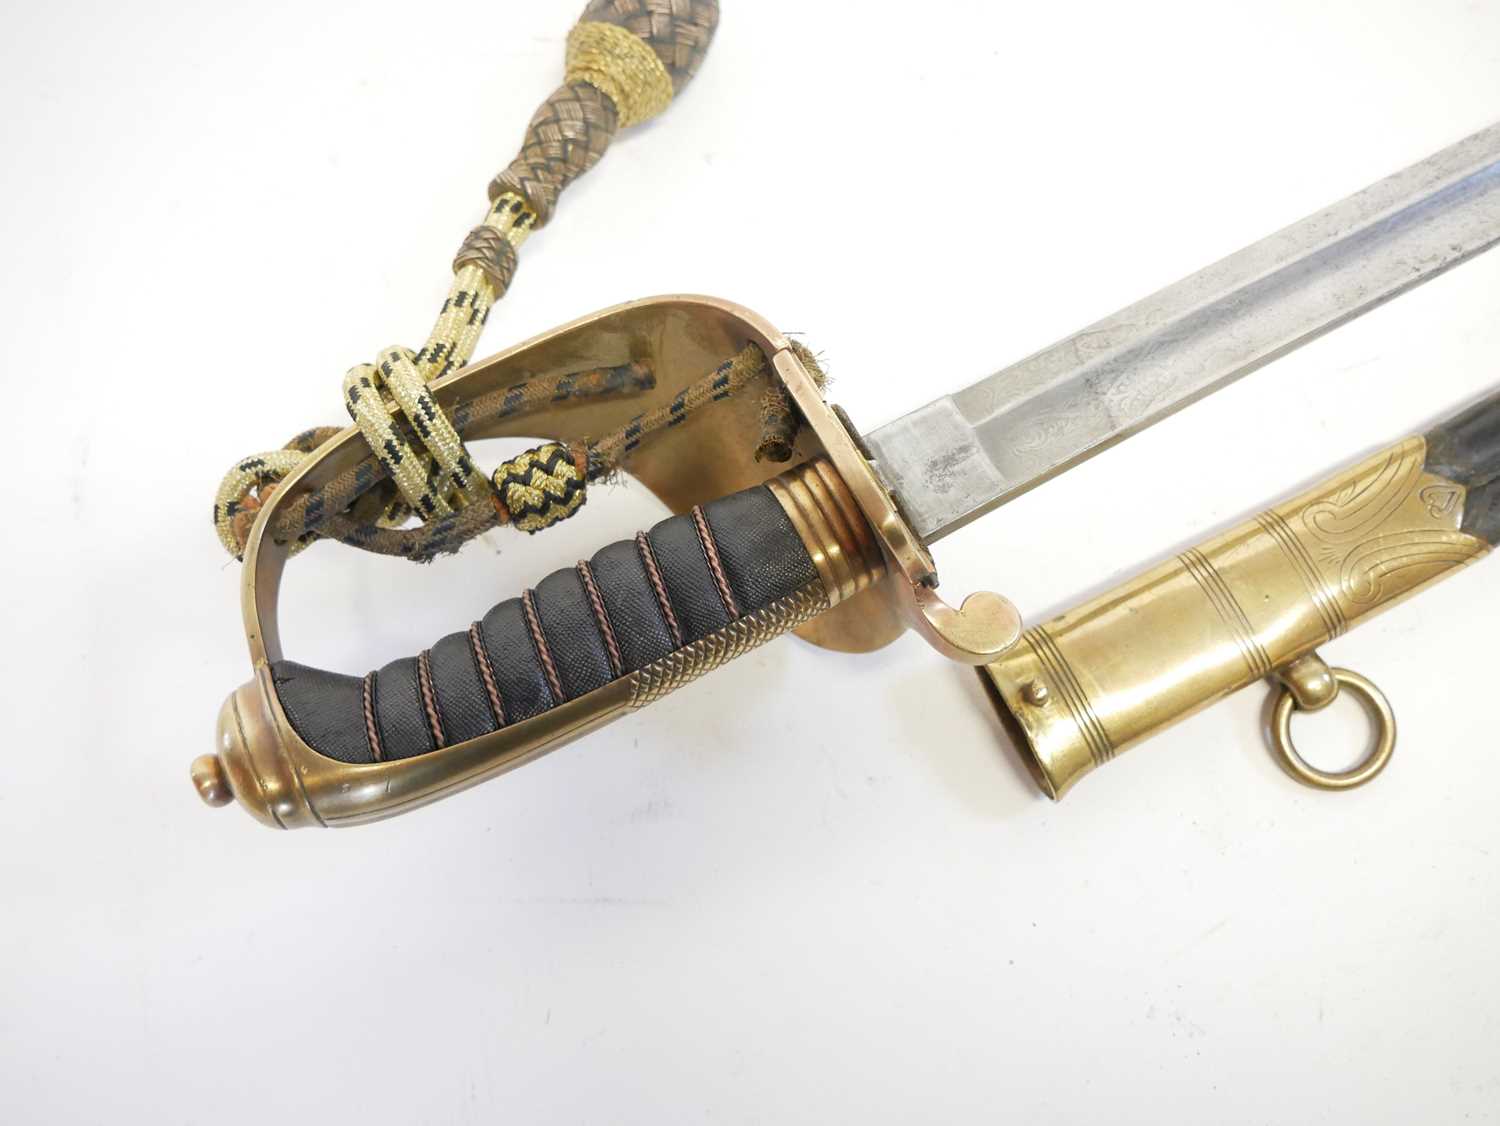 Royal Navy Petty Officer's sword, similar to an 1827 Naval sword but without the lion head pommel, - Image 10 of 16